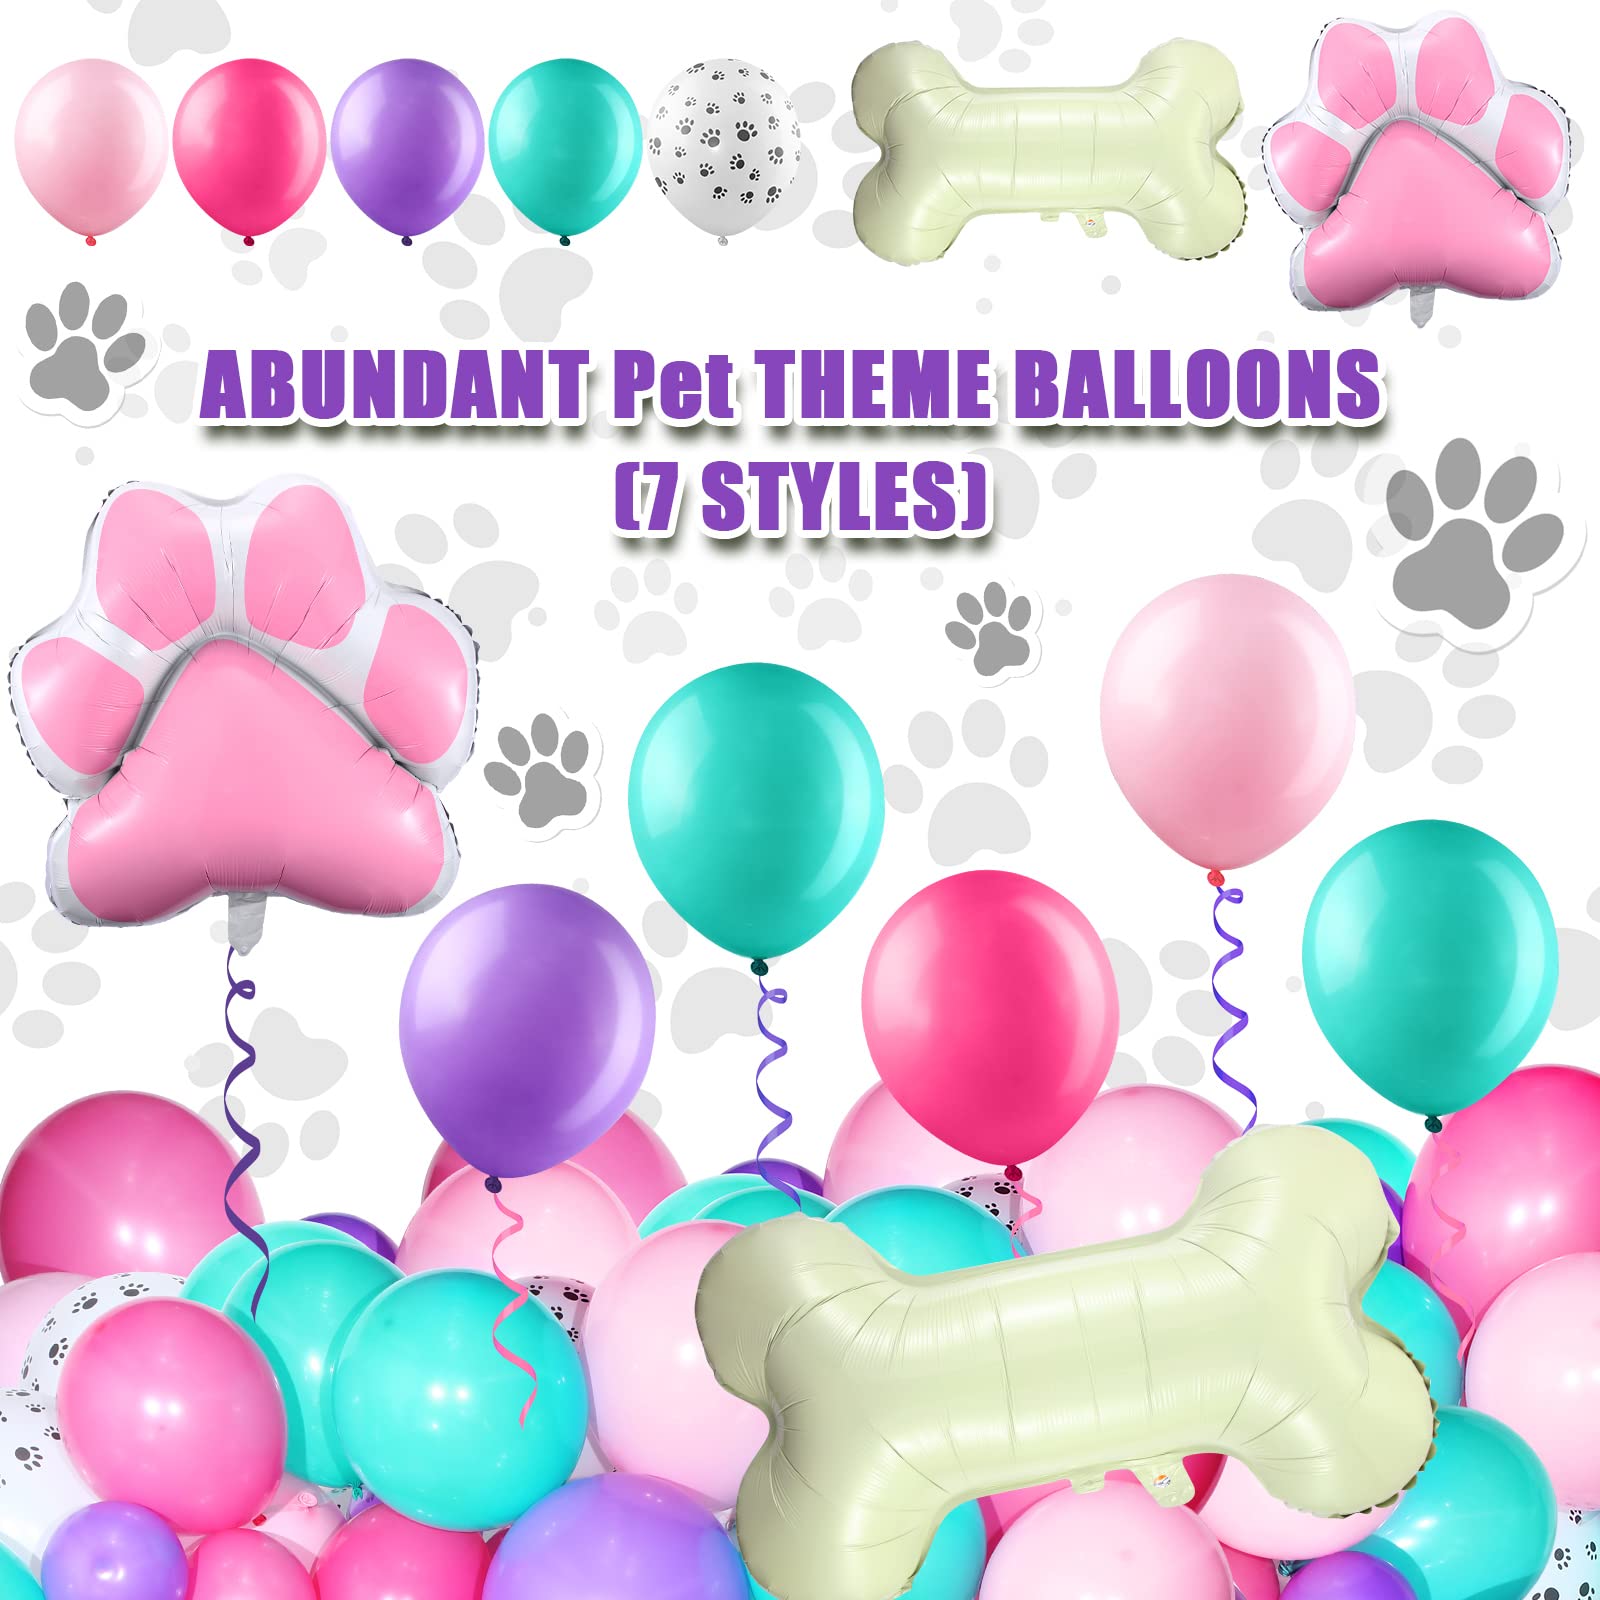 164 Pcs Paw Printed Balloon Garland Kit, Dog Paw Balloons Colorful Latex Balloons with Dog Paw Bone Shaped Aluminum Foil Balloons for Boy Girl Birthday Party Decorations (Fresh Colors)